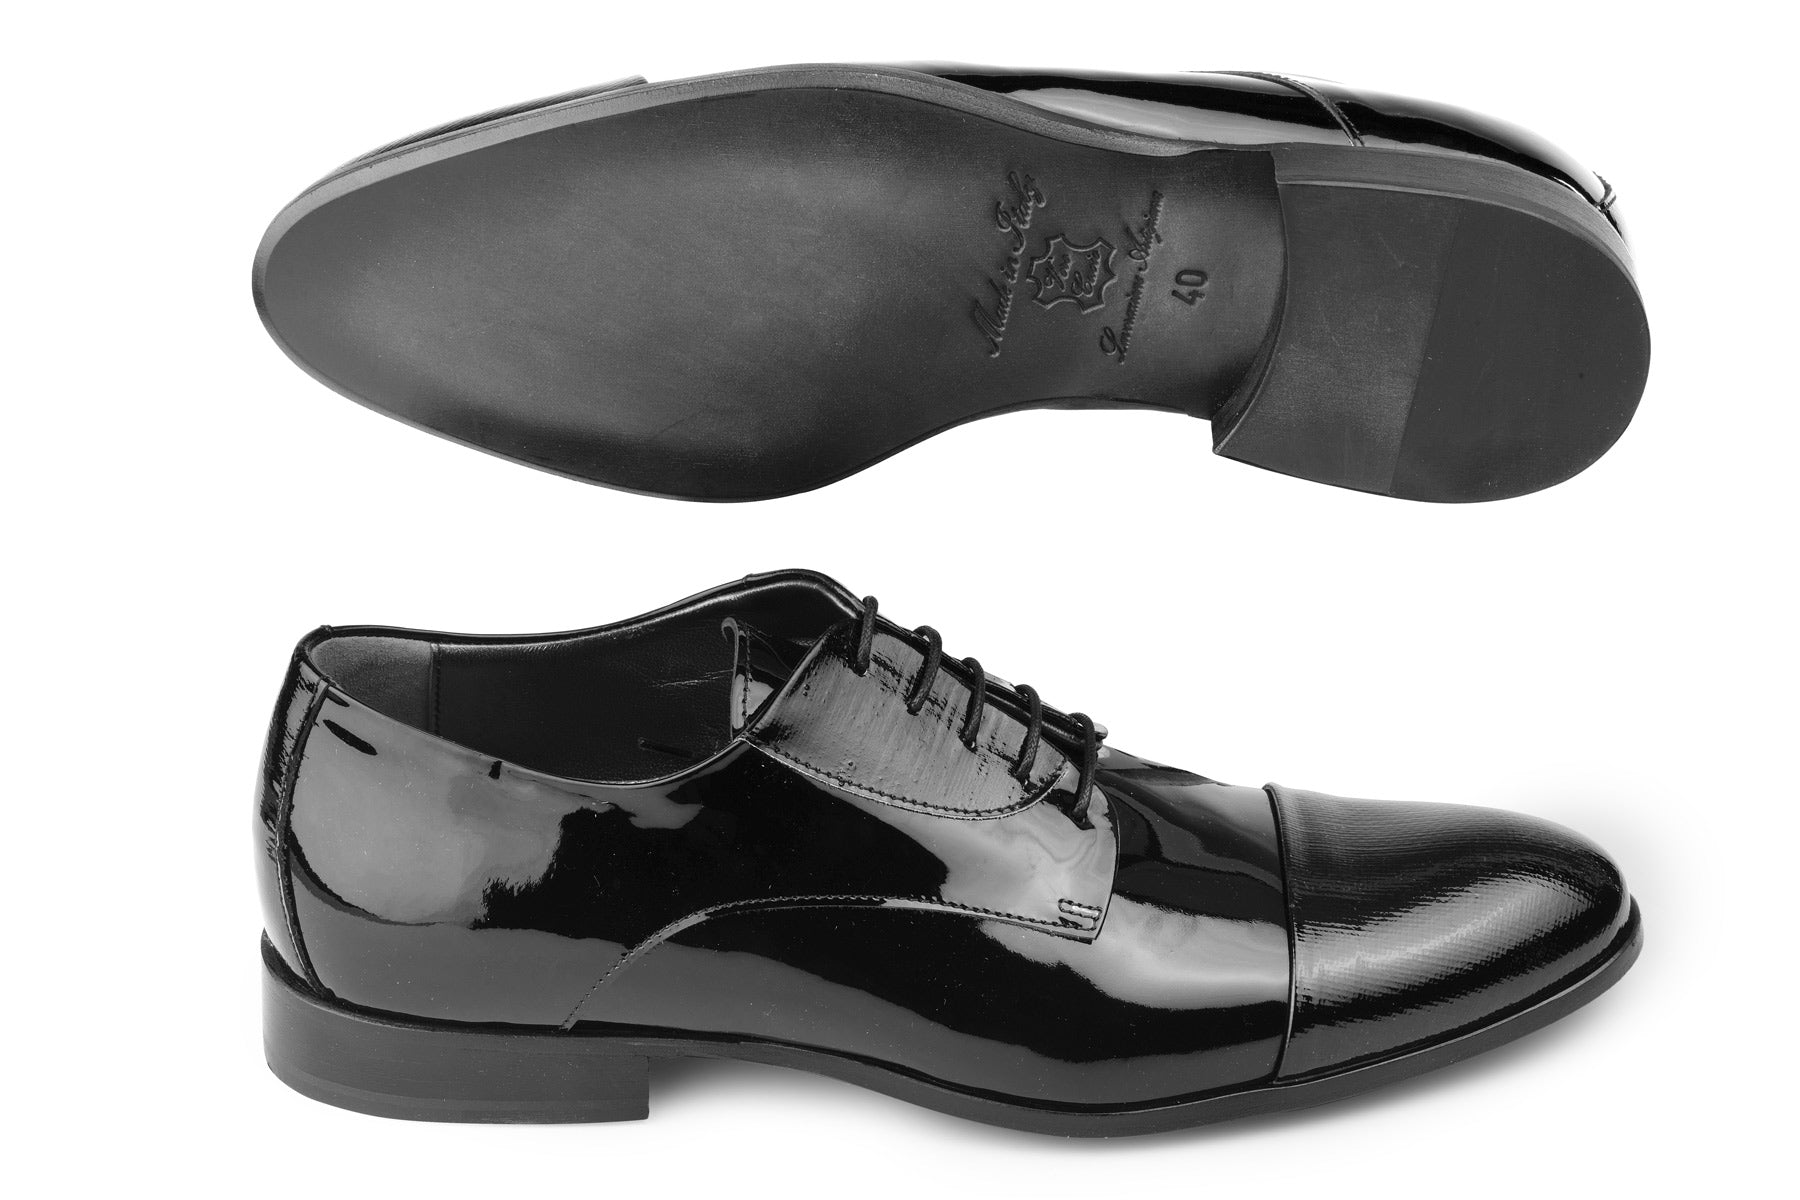 Patent leather ceremonial shoes